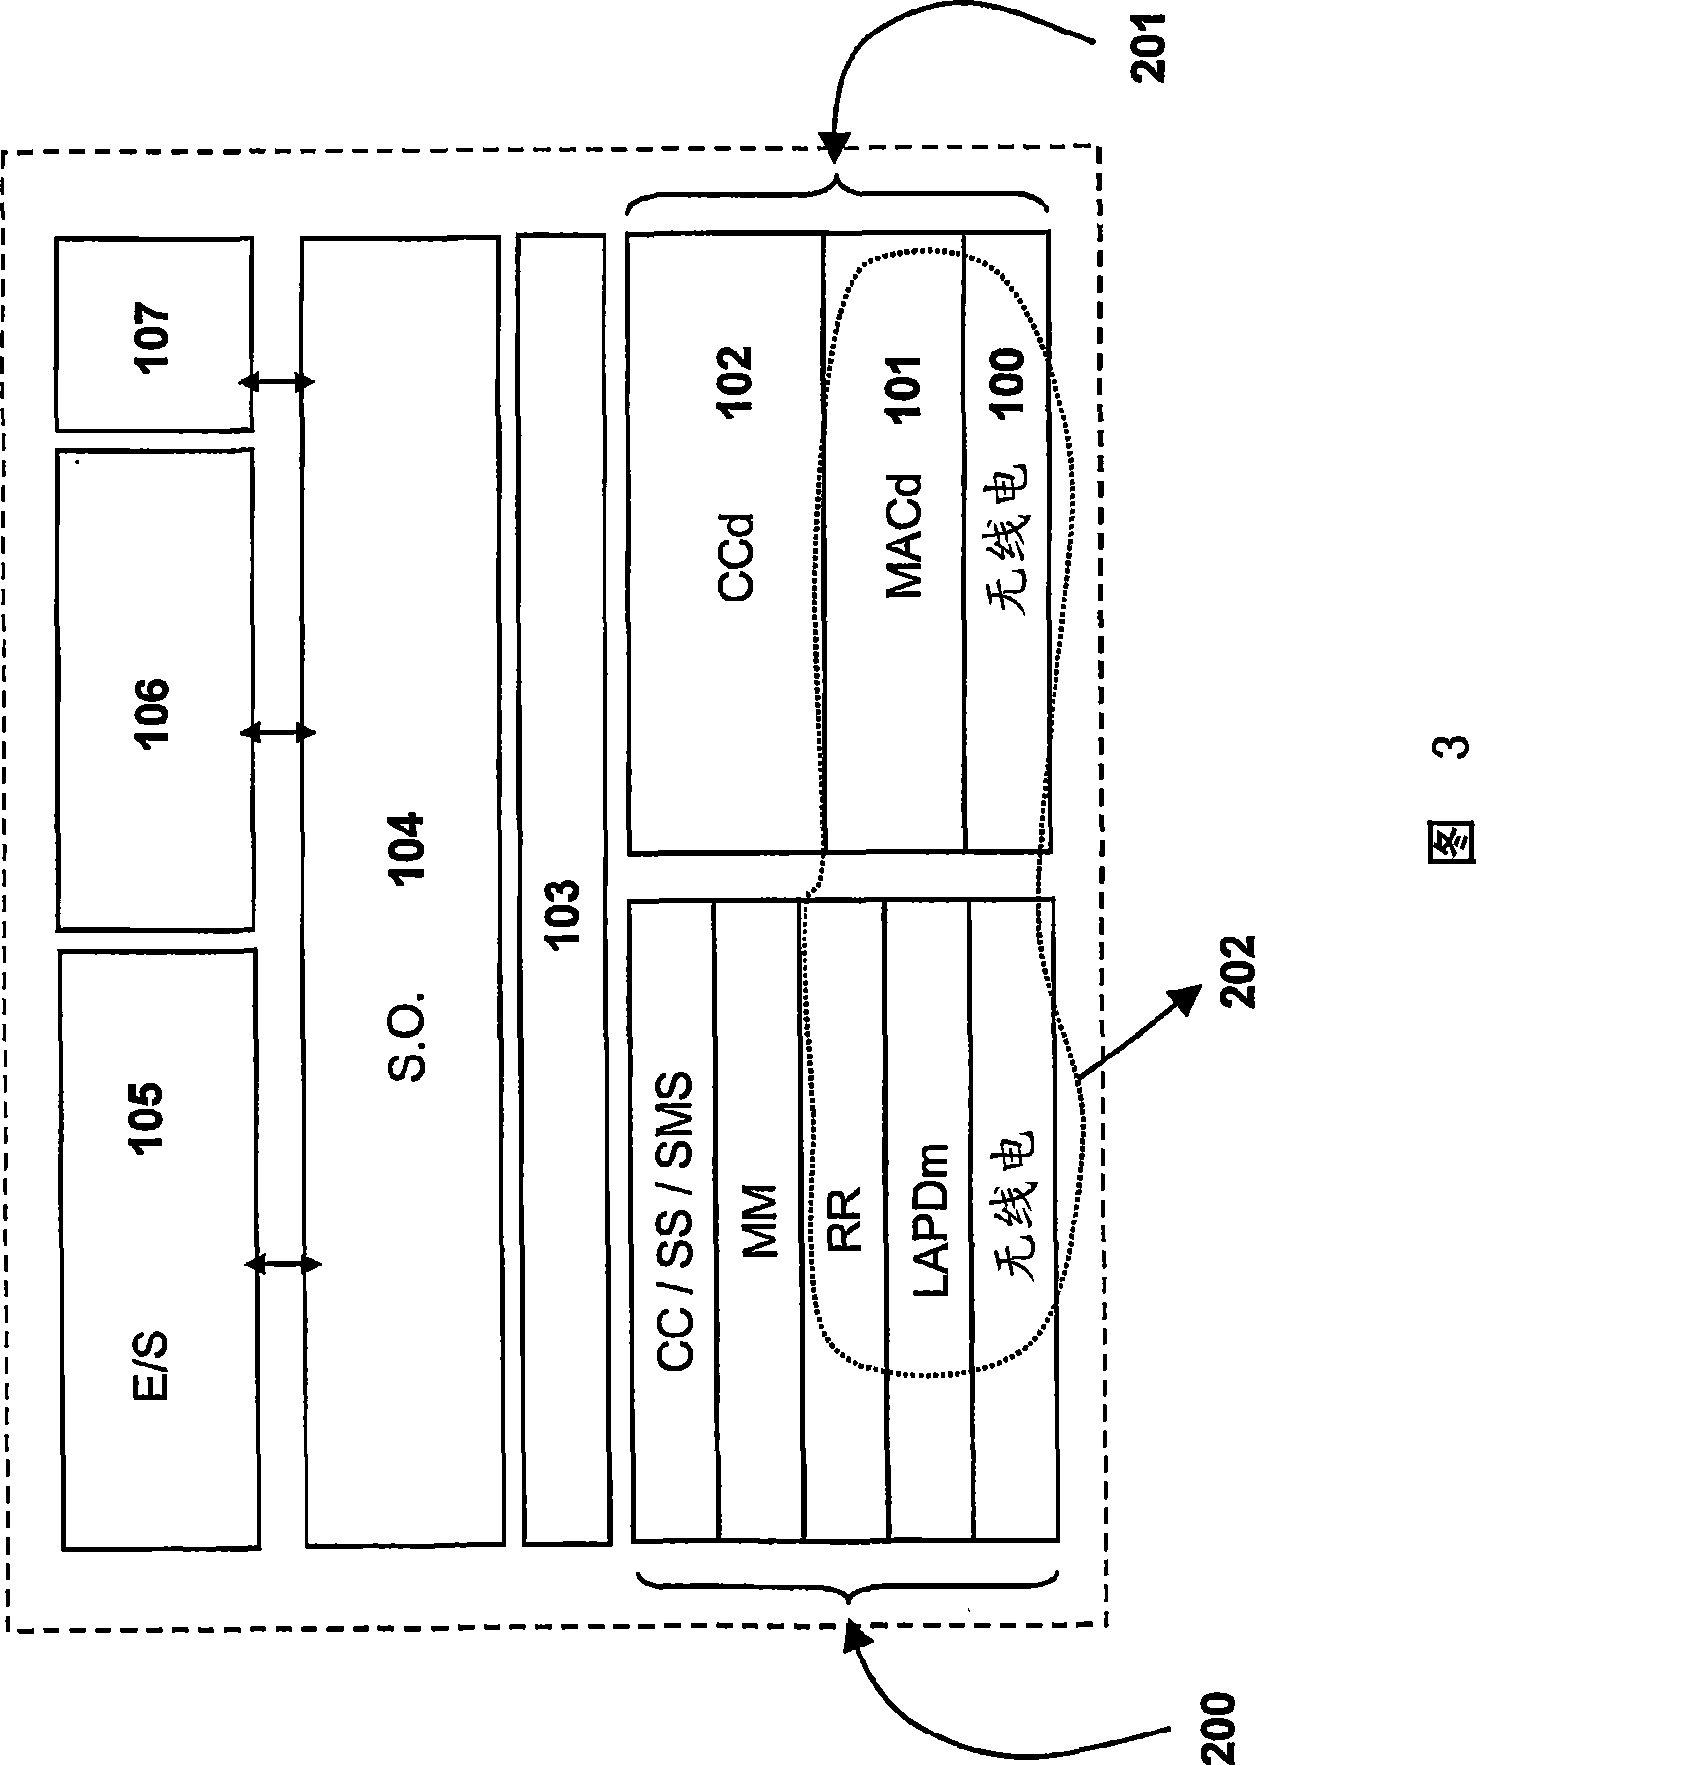 Method and system for establishing a direct radio communication between two or more user devices in a cellular mobile communication system